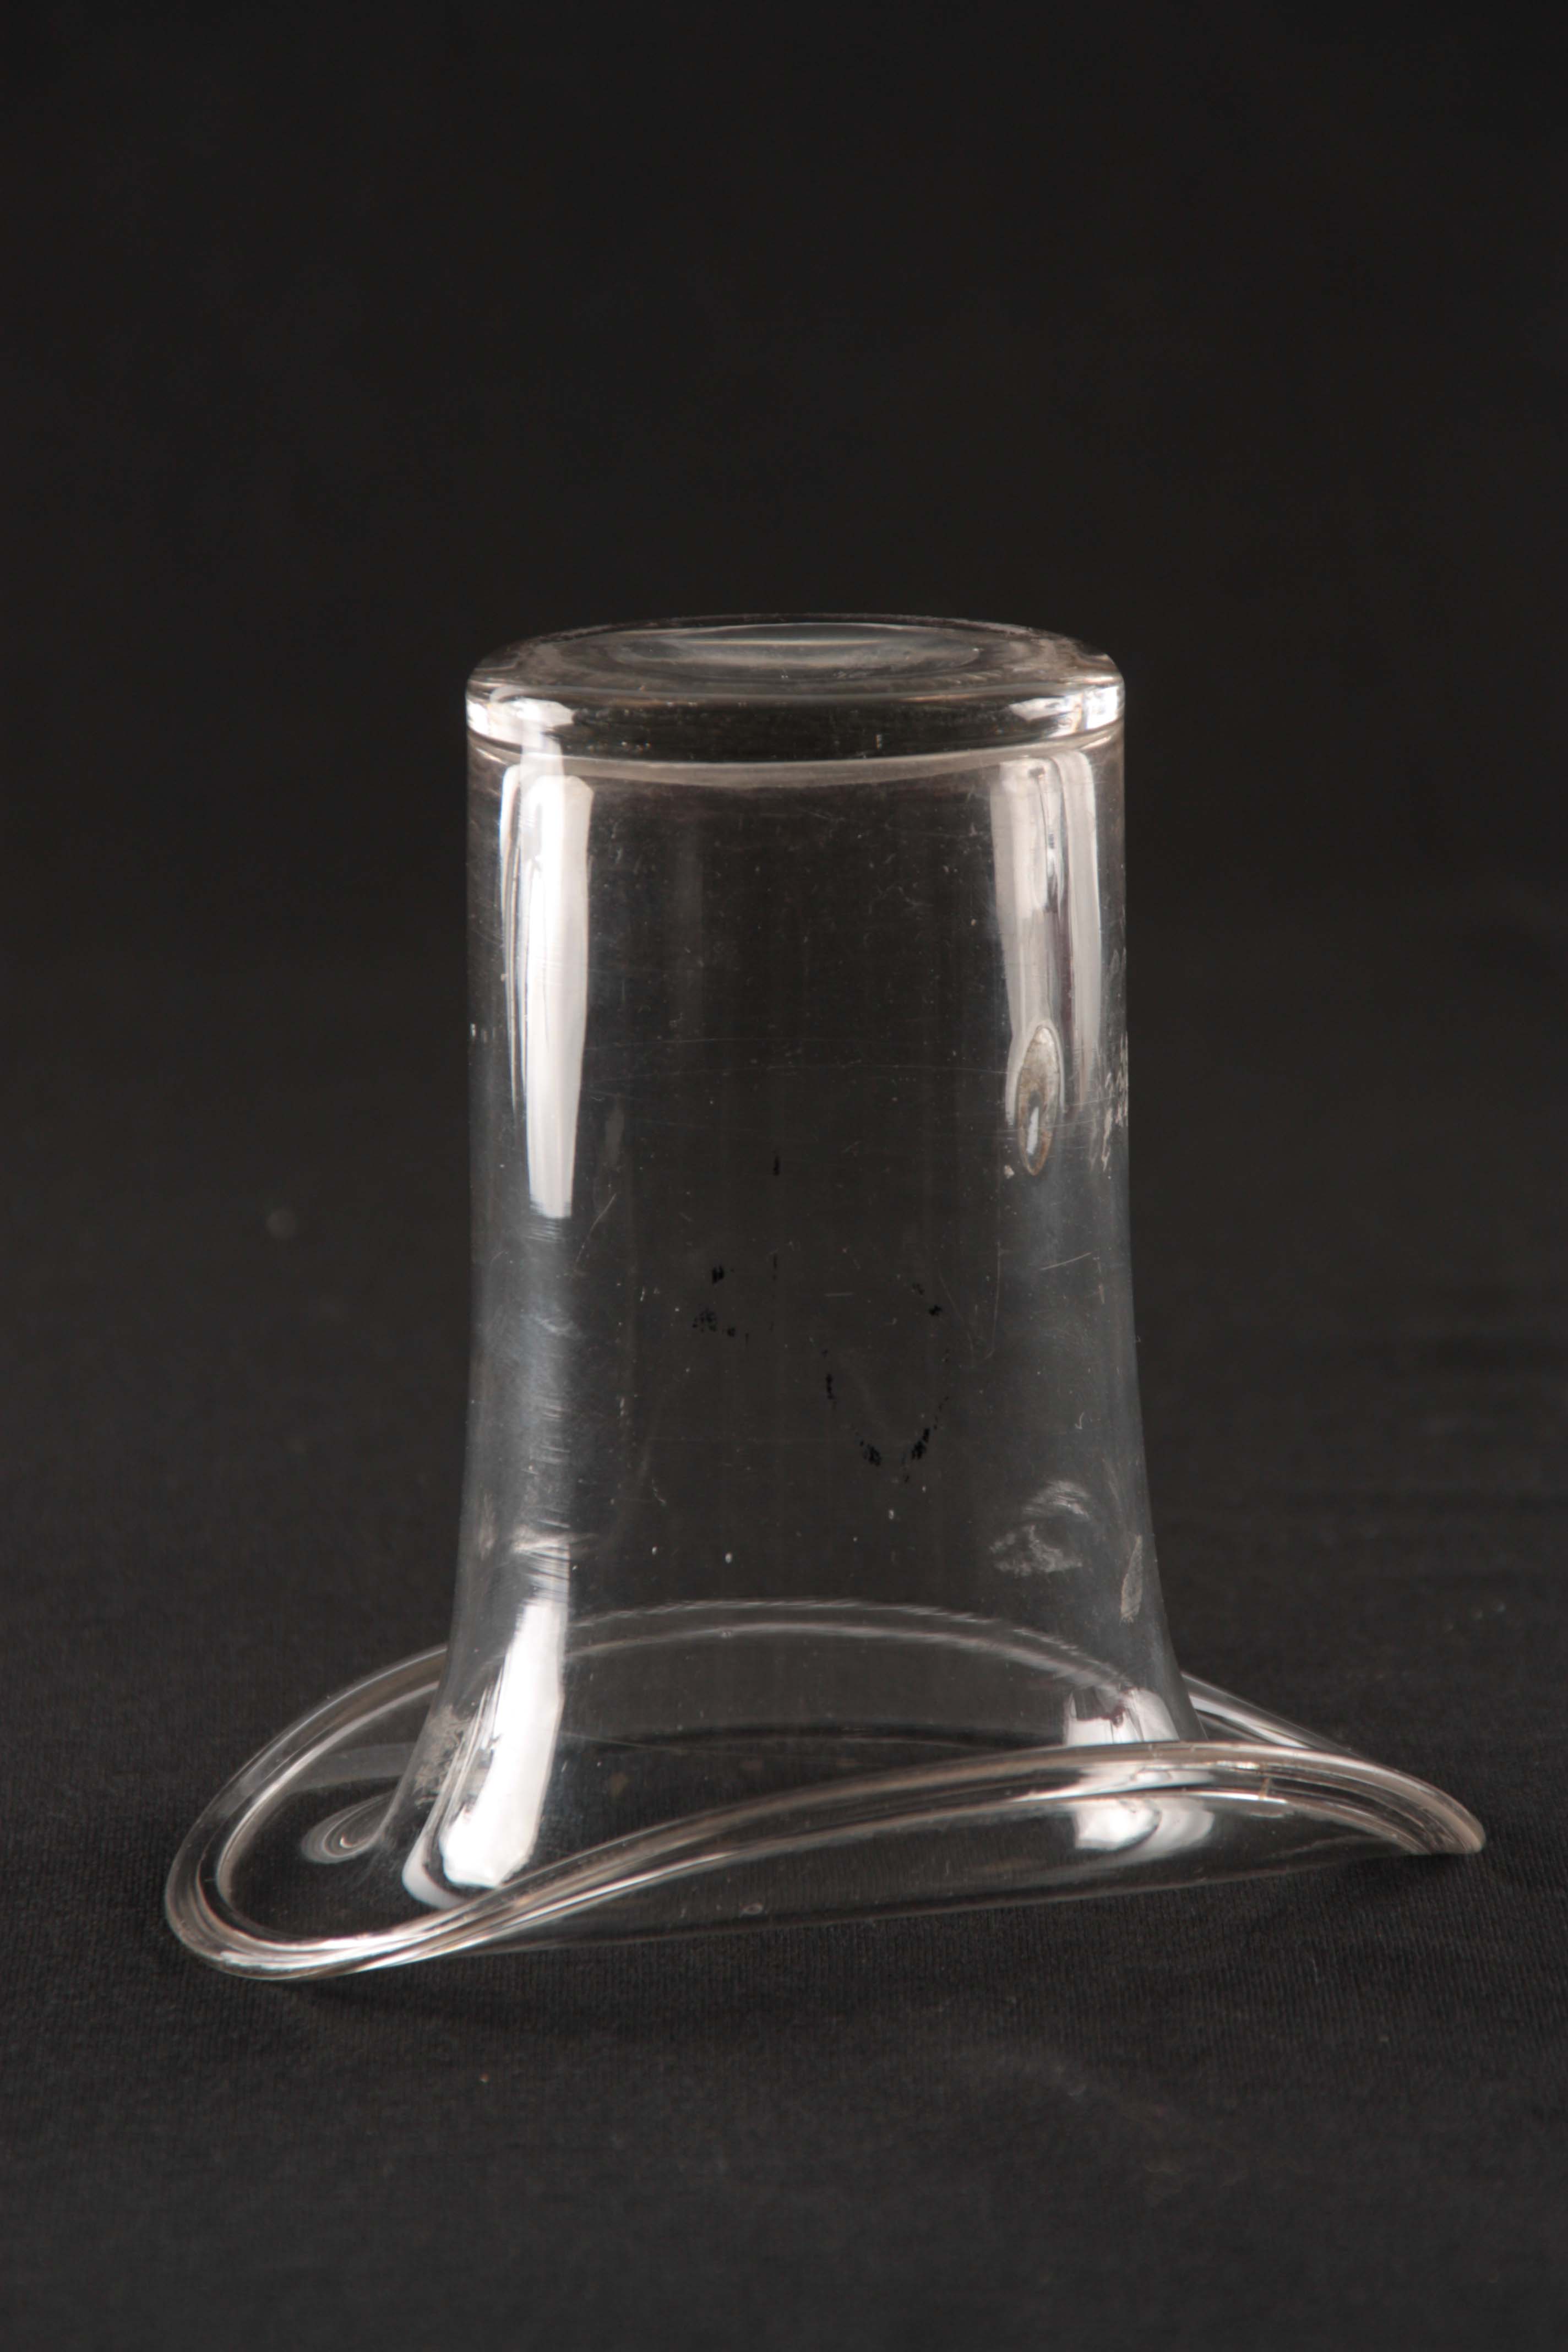 A GEORGIAN NOVELTY CLEAR GLASS MATCHSTICK HOLDER IN THE FORM OF A TOP HAT 11cm high. - Image 3 of 4